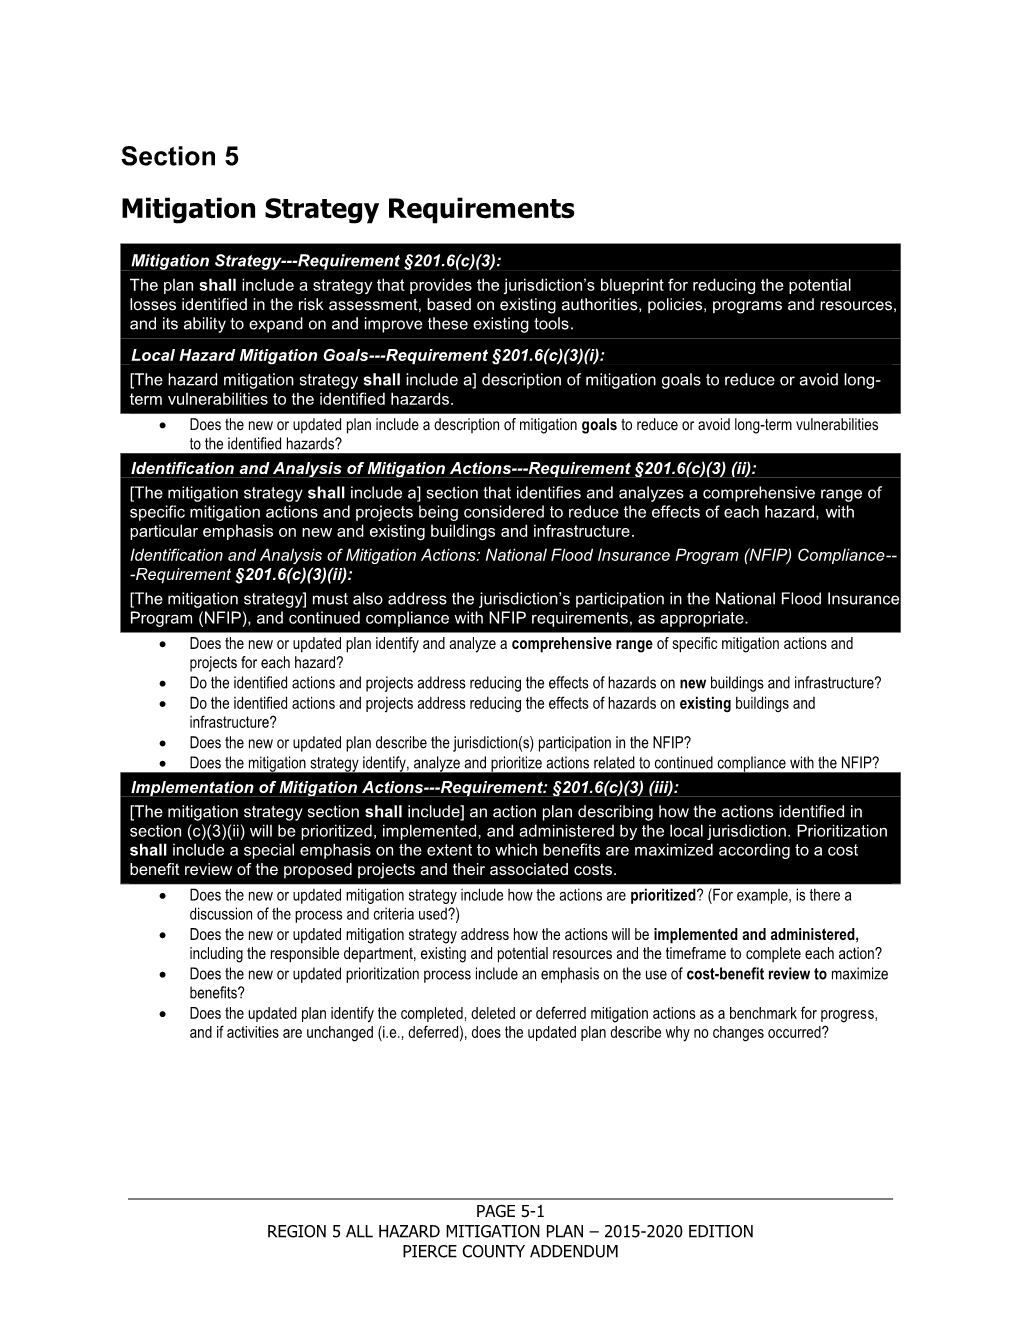 Section 5 Mitigation Strategy Requirements